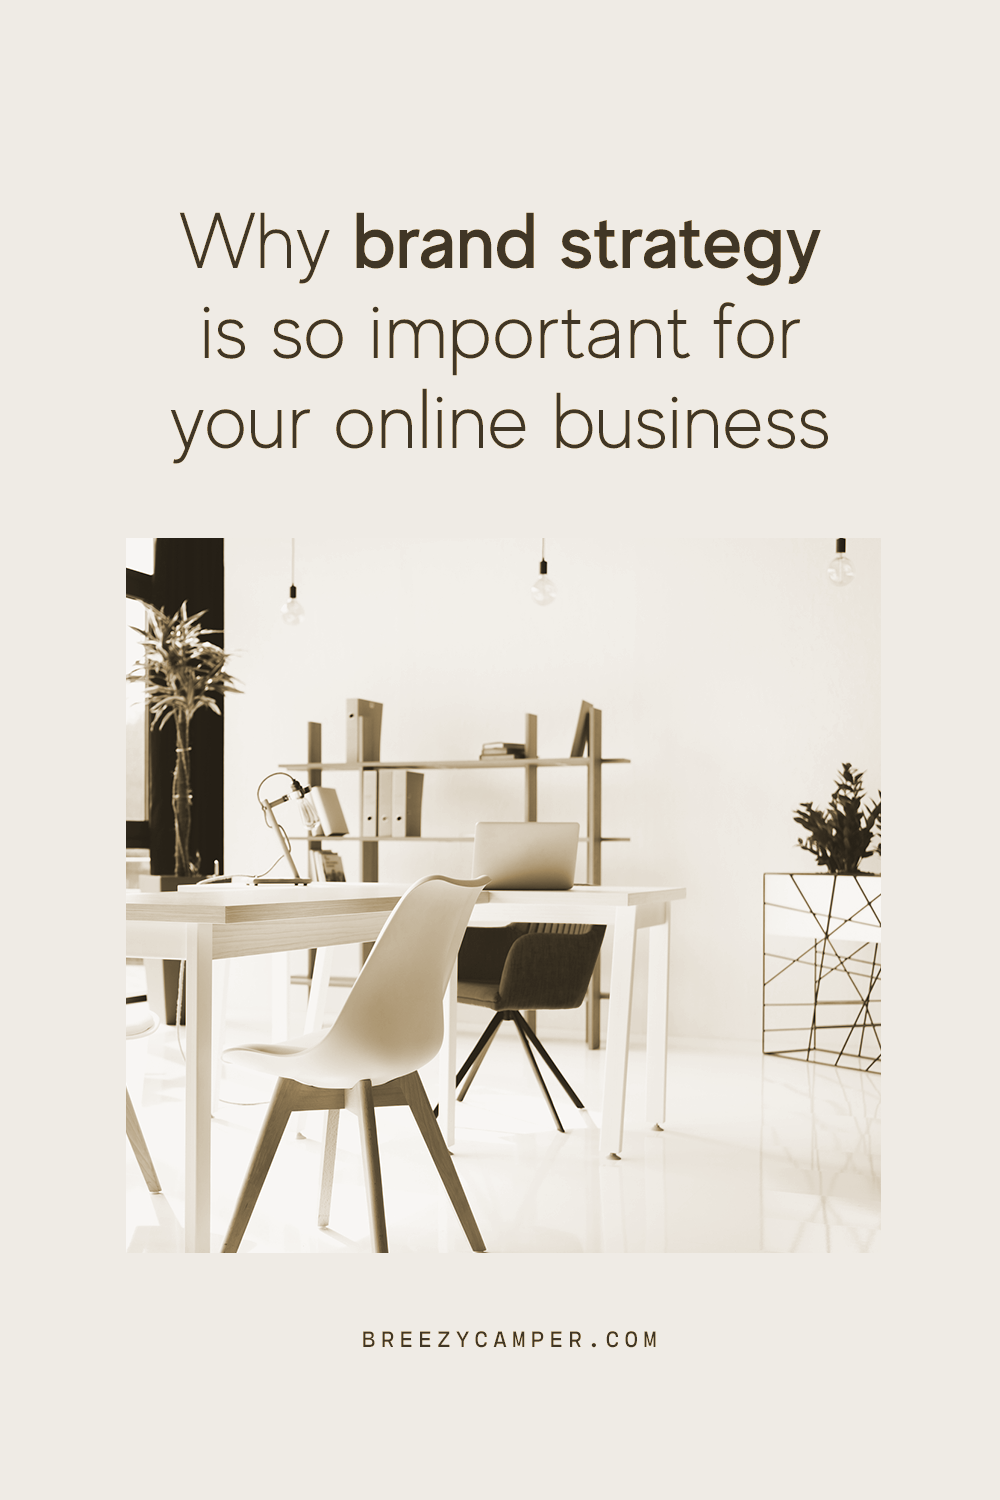 Office photo with the text "Why brand strategy is so important for your online business"